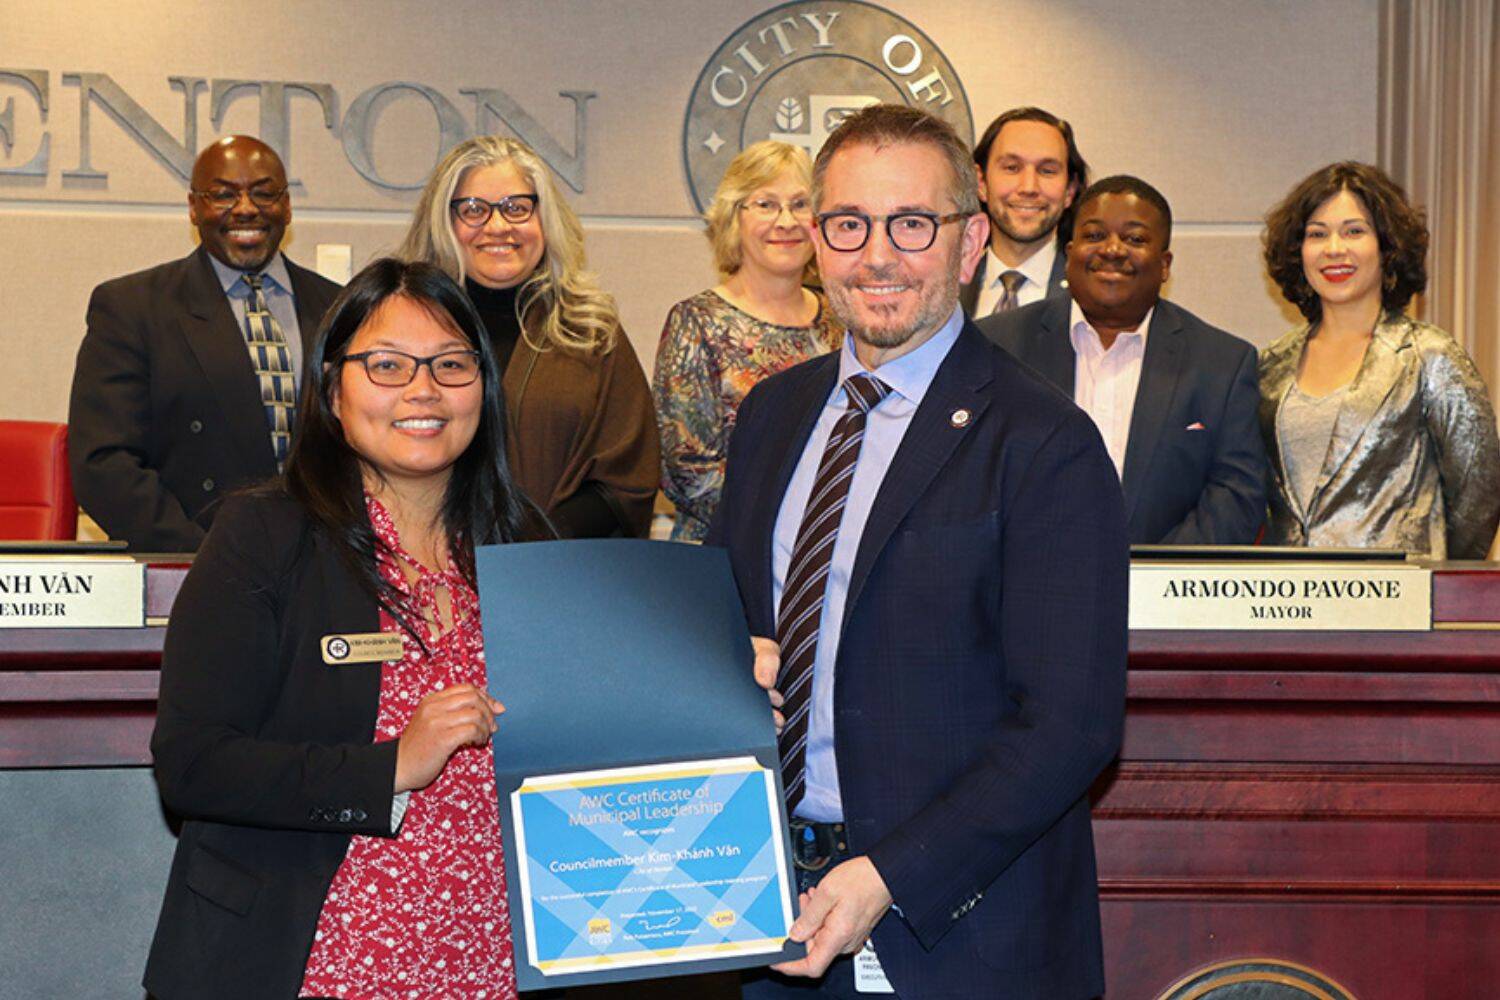 Mayor Armondo Pavone presents City Councilmember Kim Kim-Khánh Văn with her Certificate of Municipal Leadership at Monday night’s council meeting. Councilmembers James Alberson, Jr., Ruth Pérez, Valerie O’Halloran, Ryan McIrvin, Ed Prince, and Carmen Rivera join them for the presentation. (Courtesy of City of Renton)